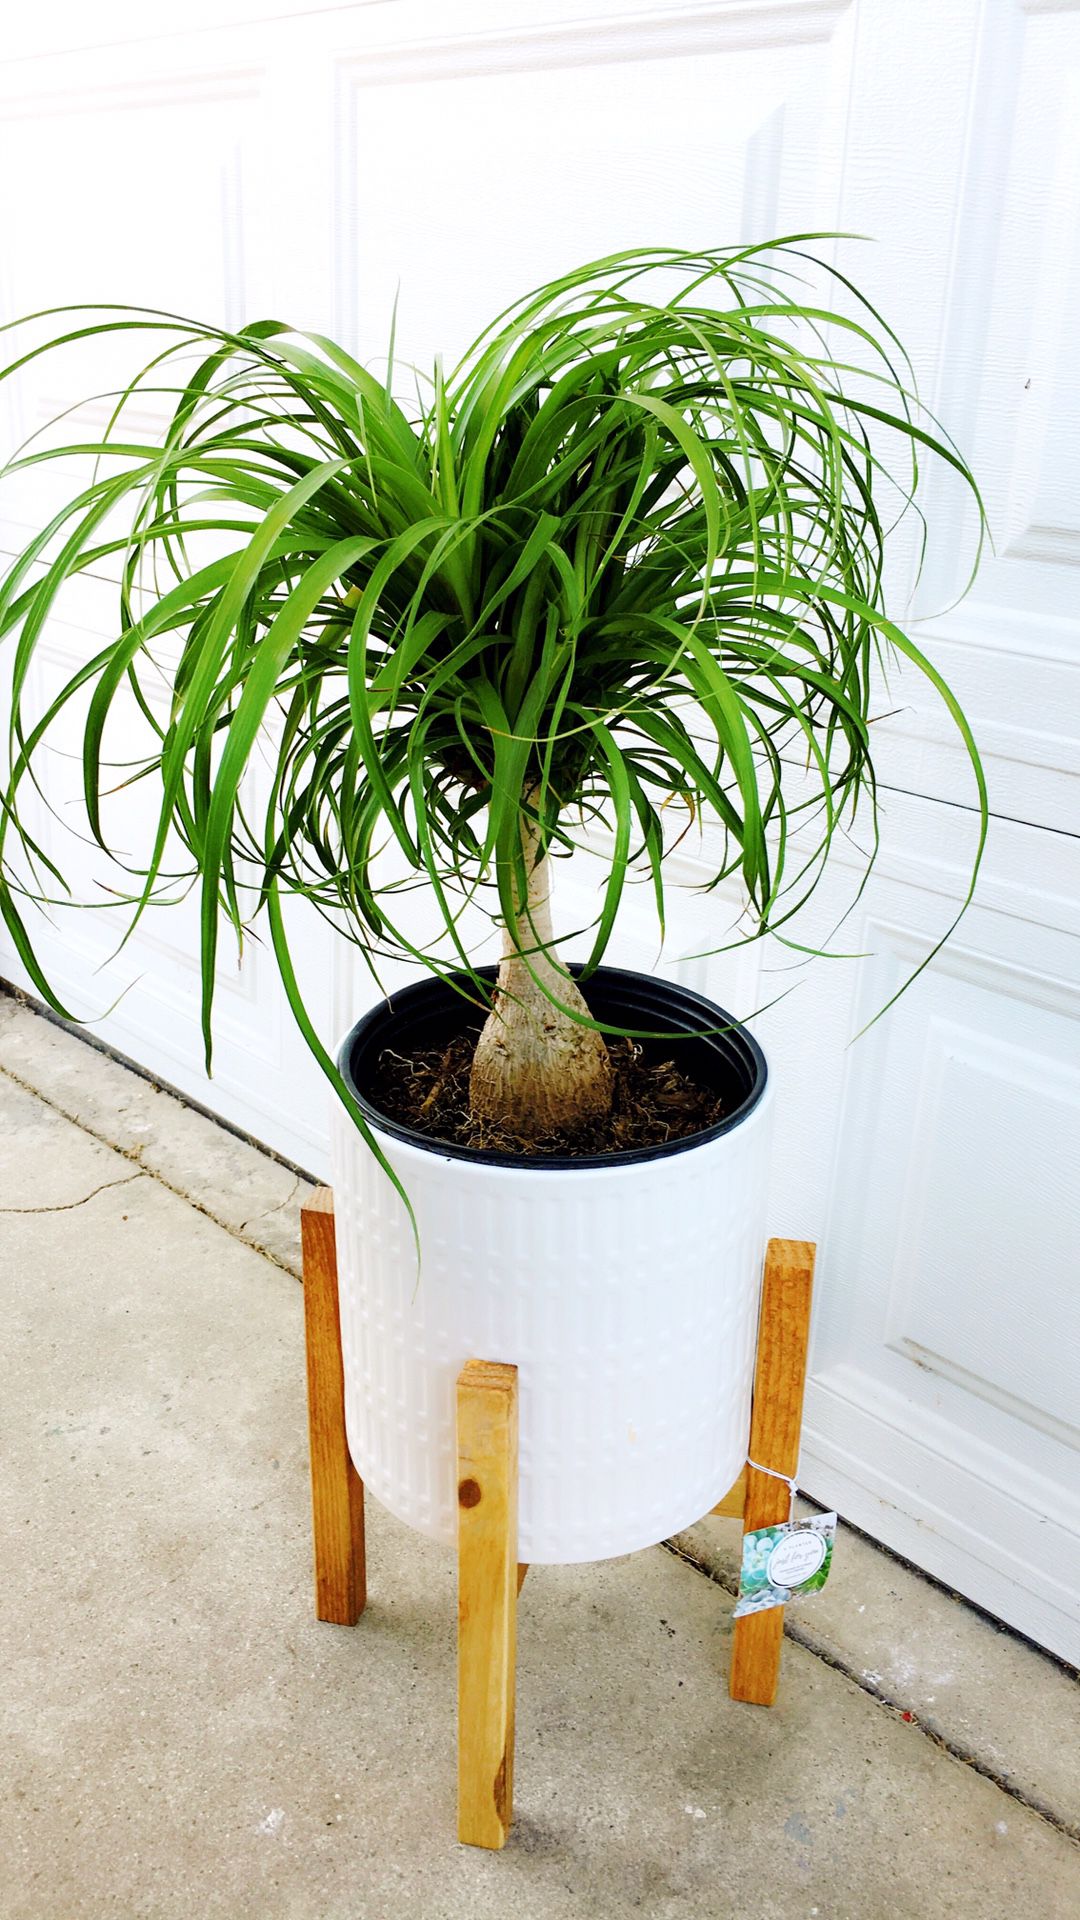 Ponytail Palm. Plant only-About 20” tall. PLANTER IS NOT INCLUDED. $20 each